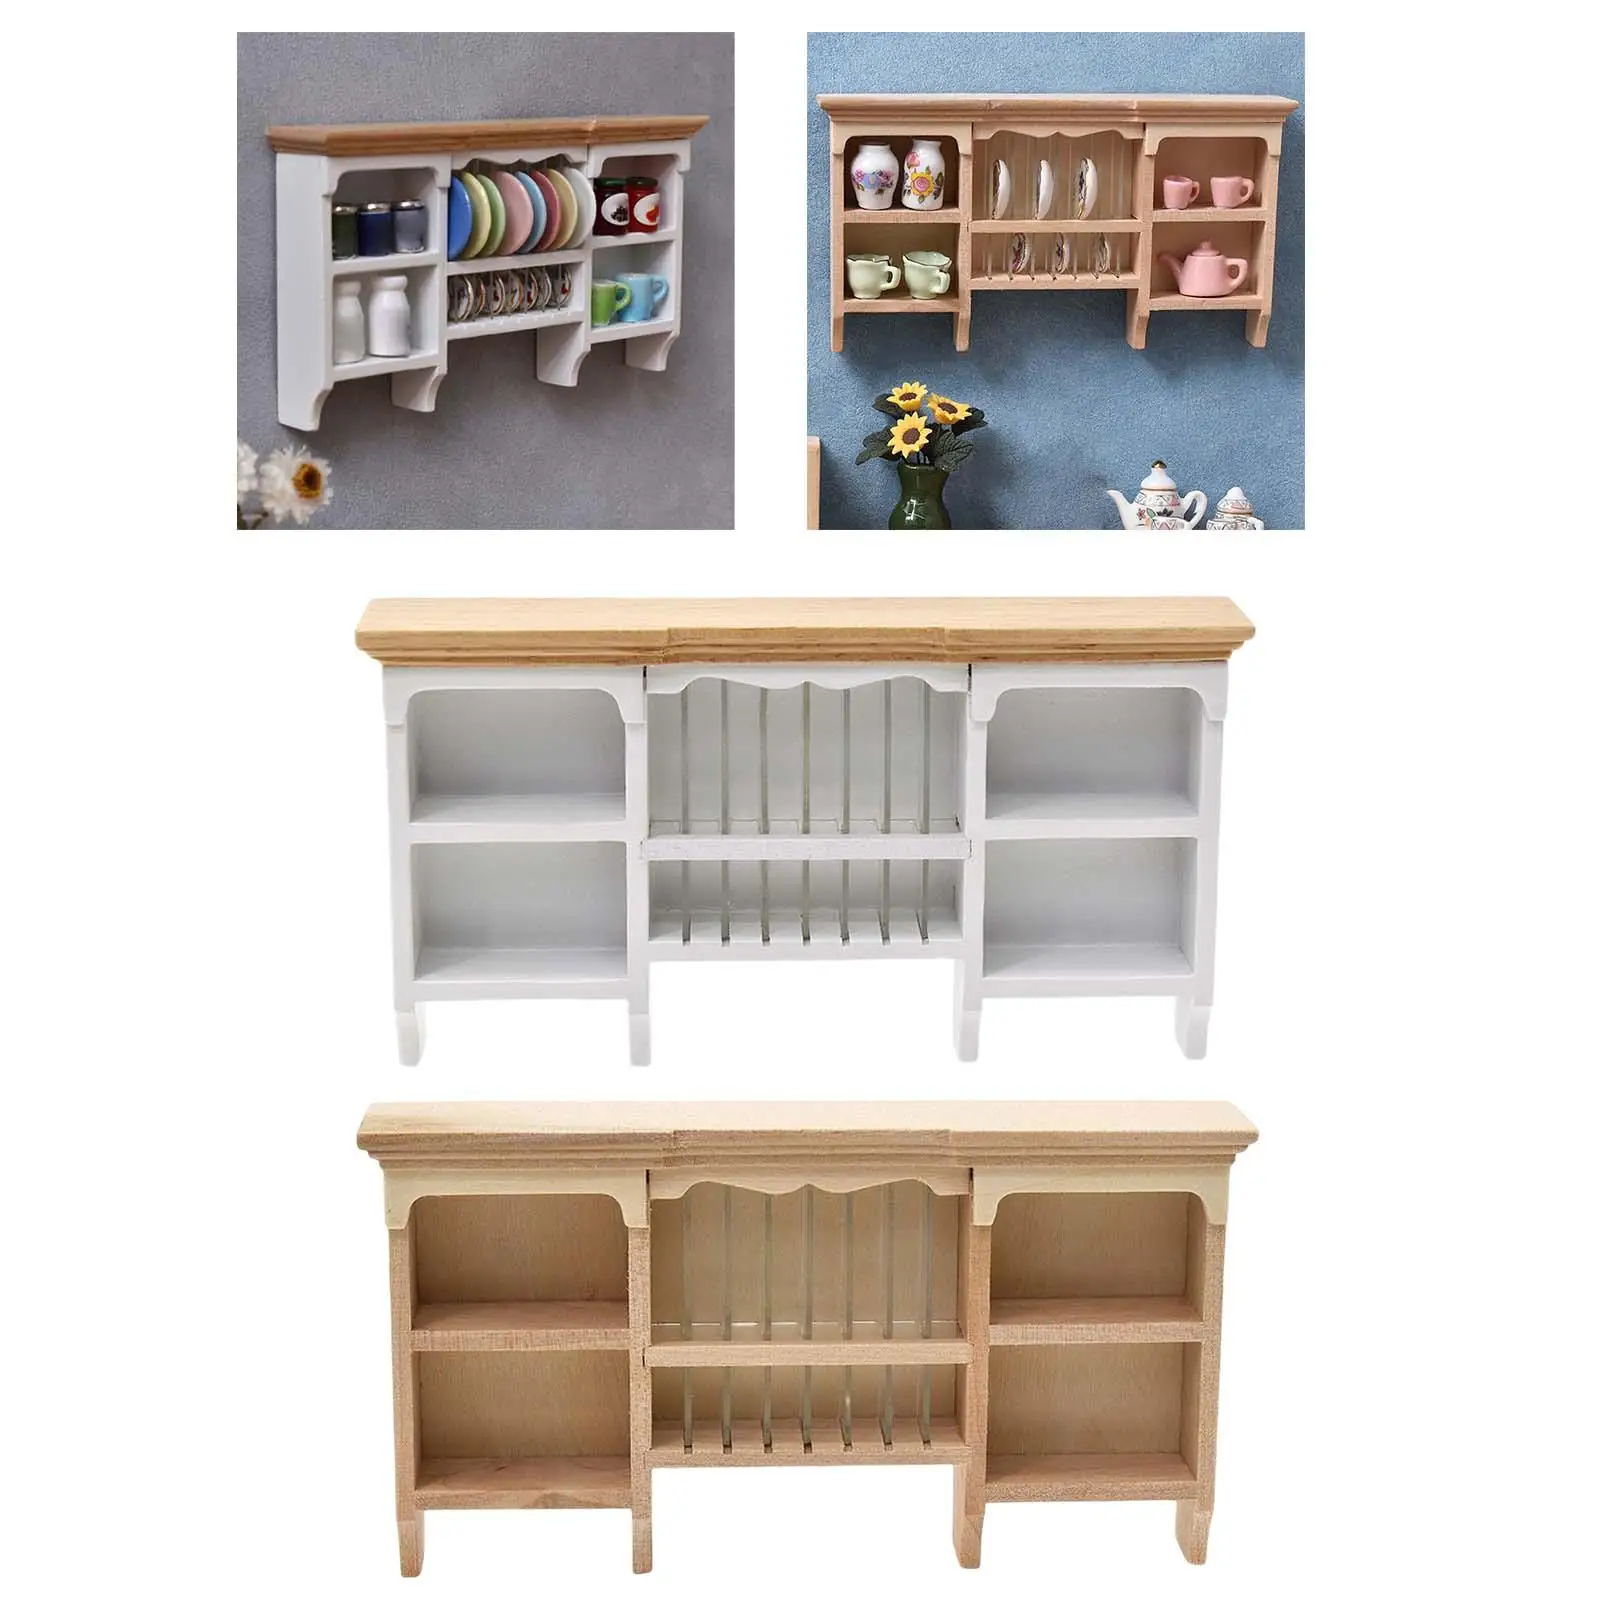 1/12 Scale Doll House Furniture Ornament Simulation Decor DIY Fitments Wooden Mini Hanging Cabinet for Dollhouses Accessories